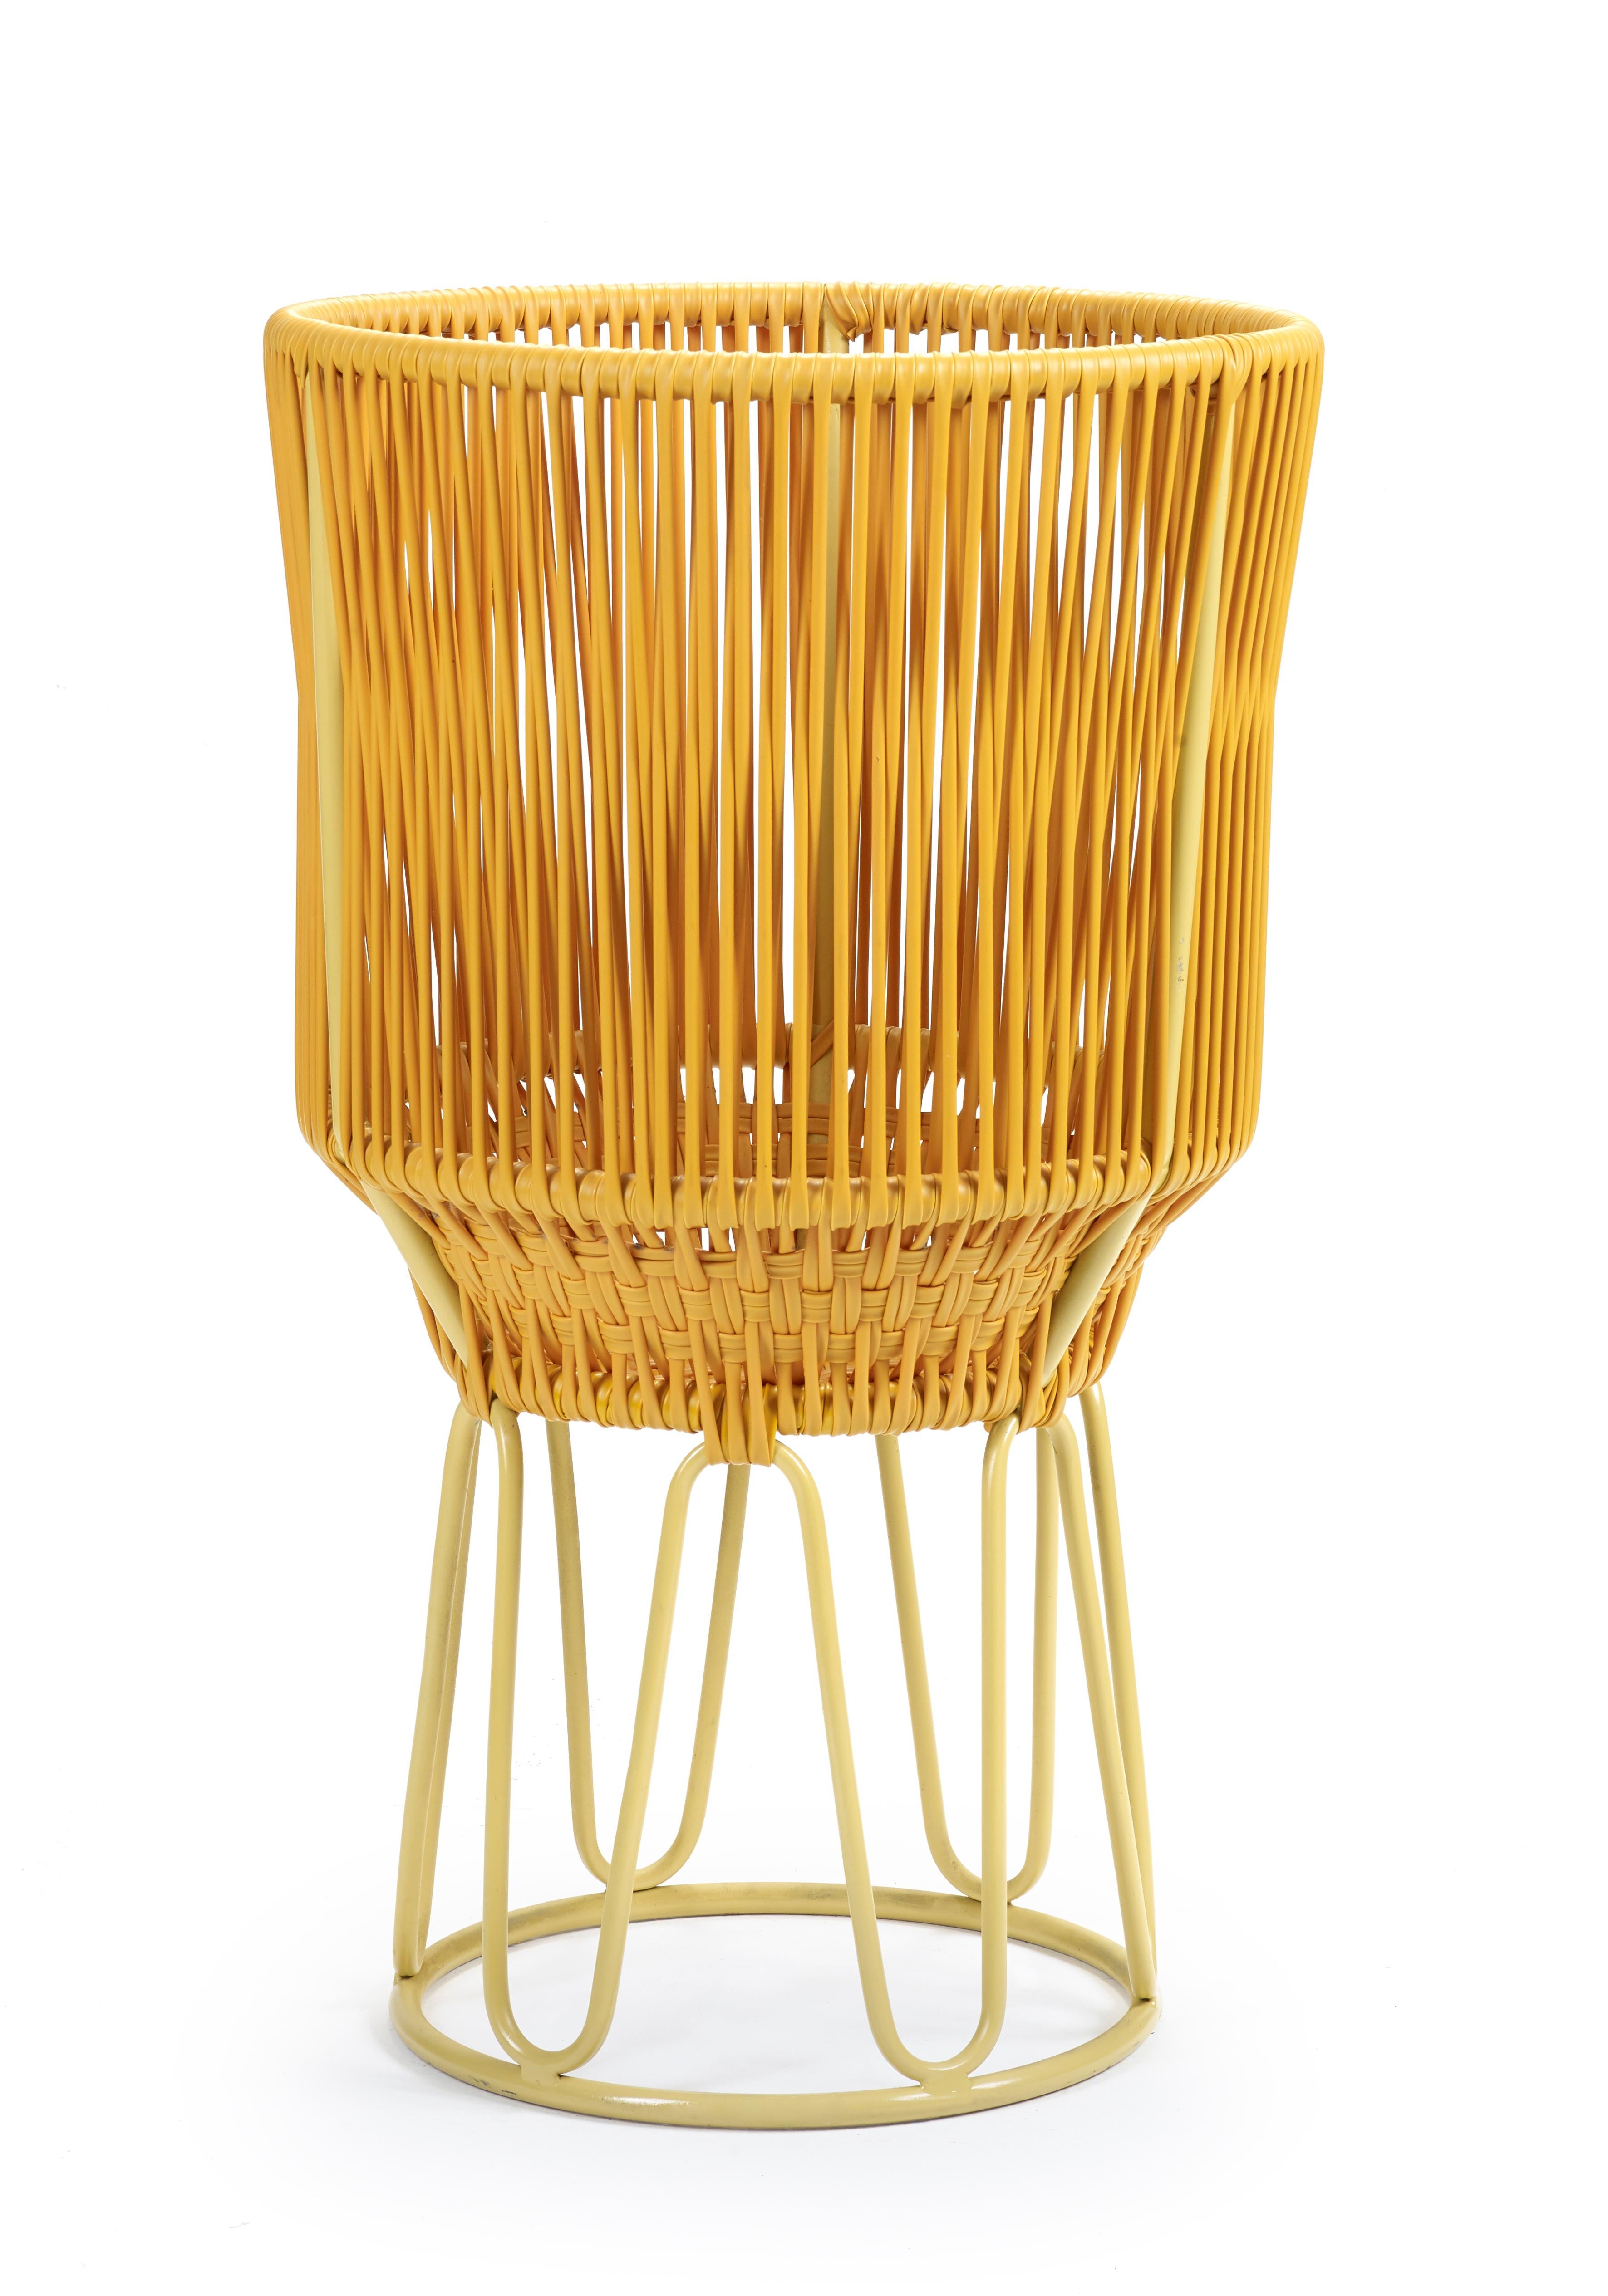 Honey Circo flower pot 2 by Sebastian Herkner
Materials: galvanized and powder-coated tubular steel. PVC strings.
Technique: made from recycled plastic. Weaved by local craftspeople in Colombia. 
Dimensions: 
Top diameter 40 x height 68 cm